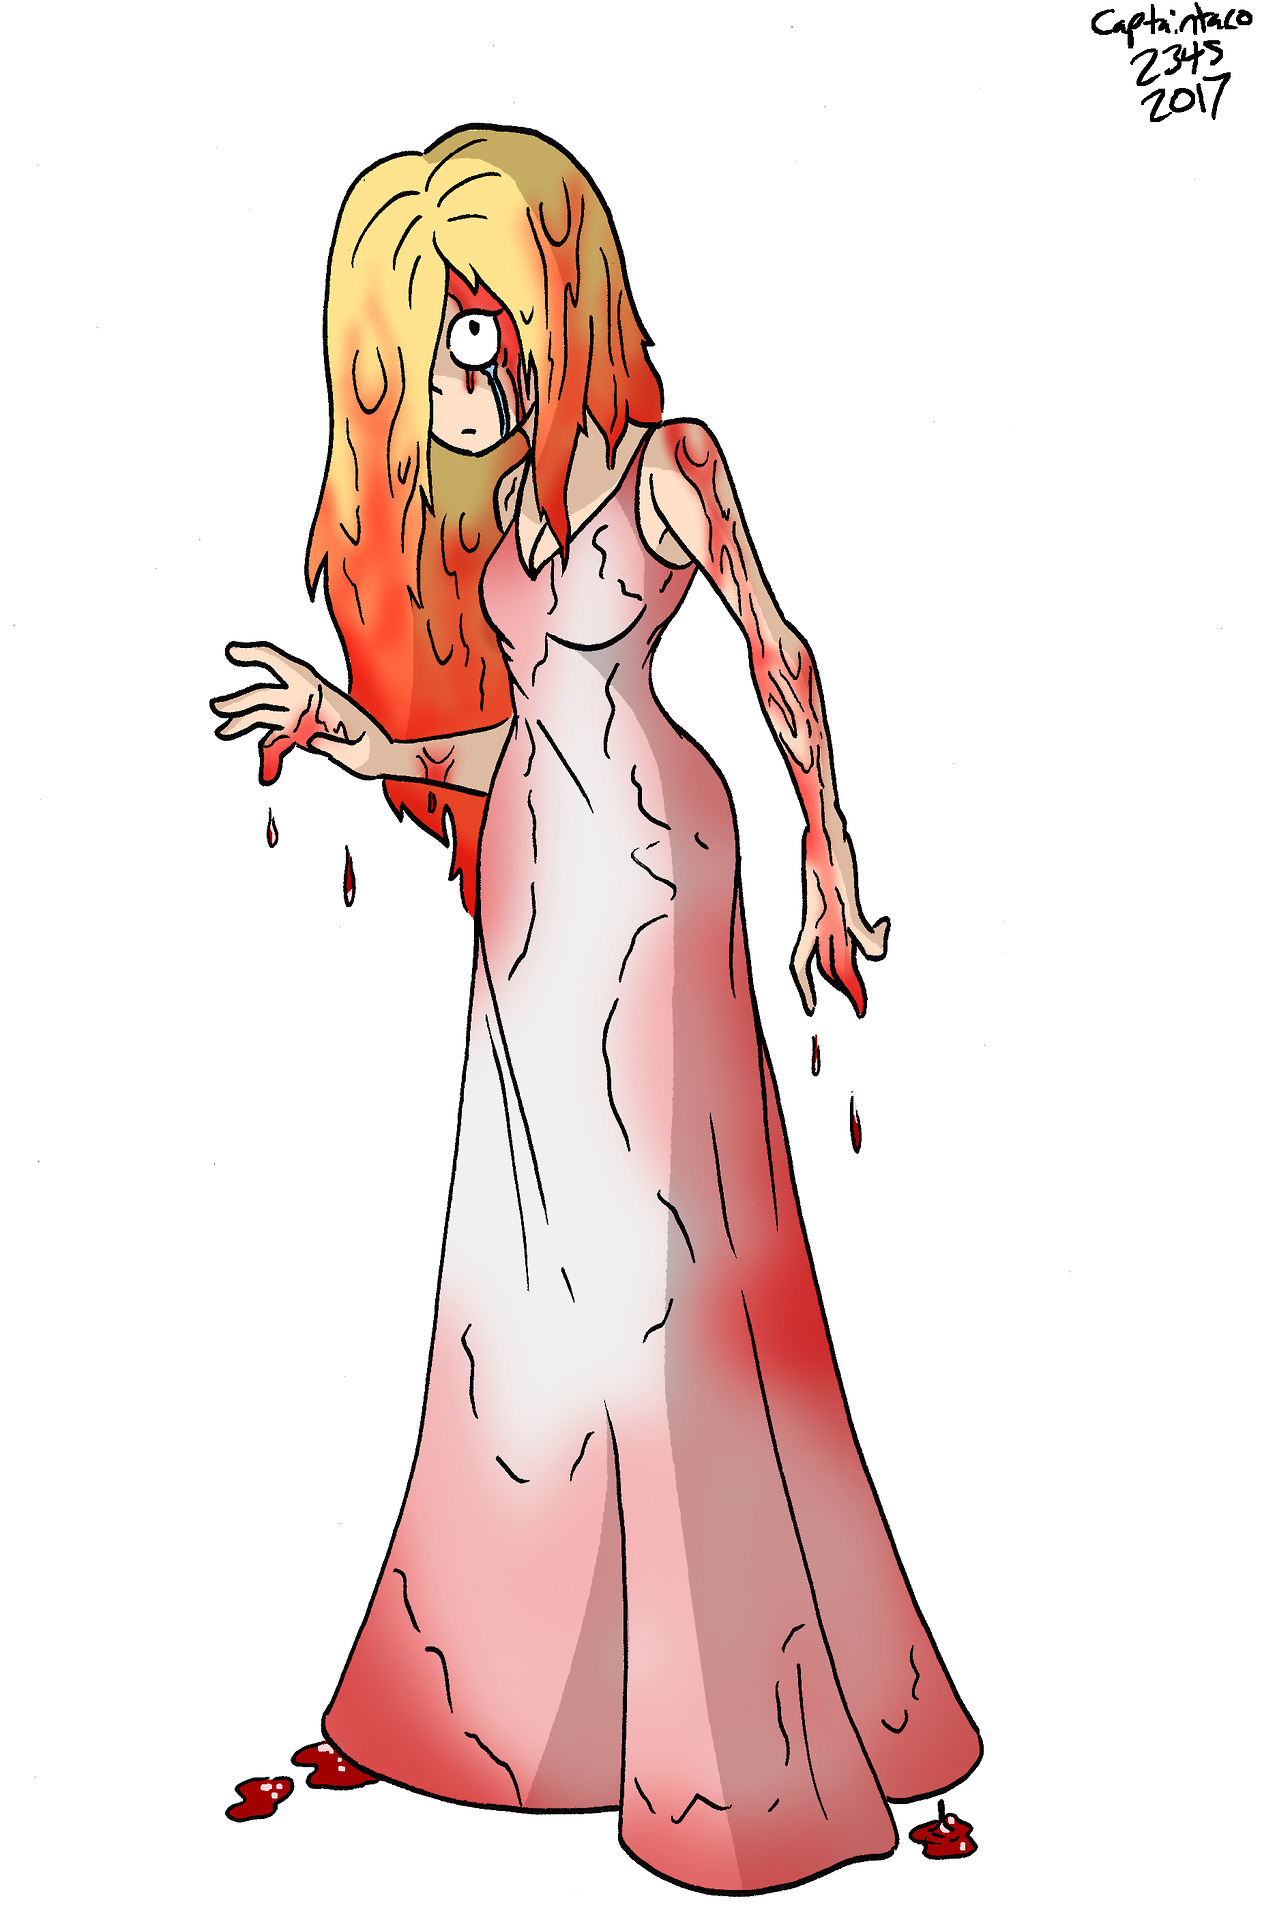 I saw Carrie for the first time around Halloween, and even though I was super bored,